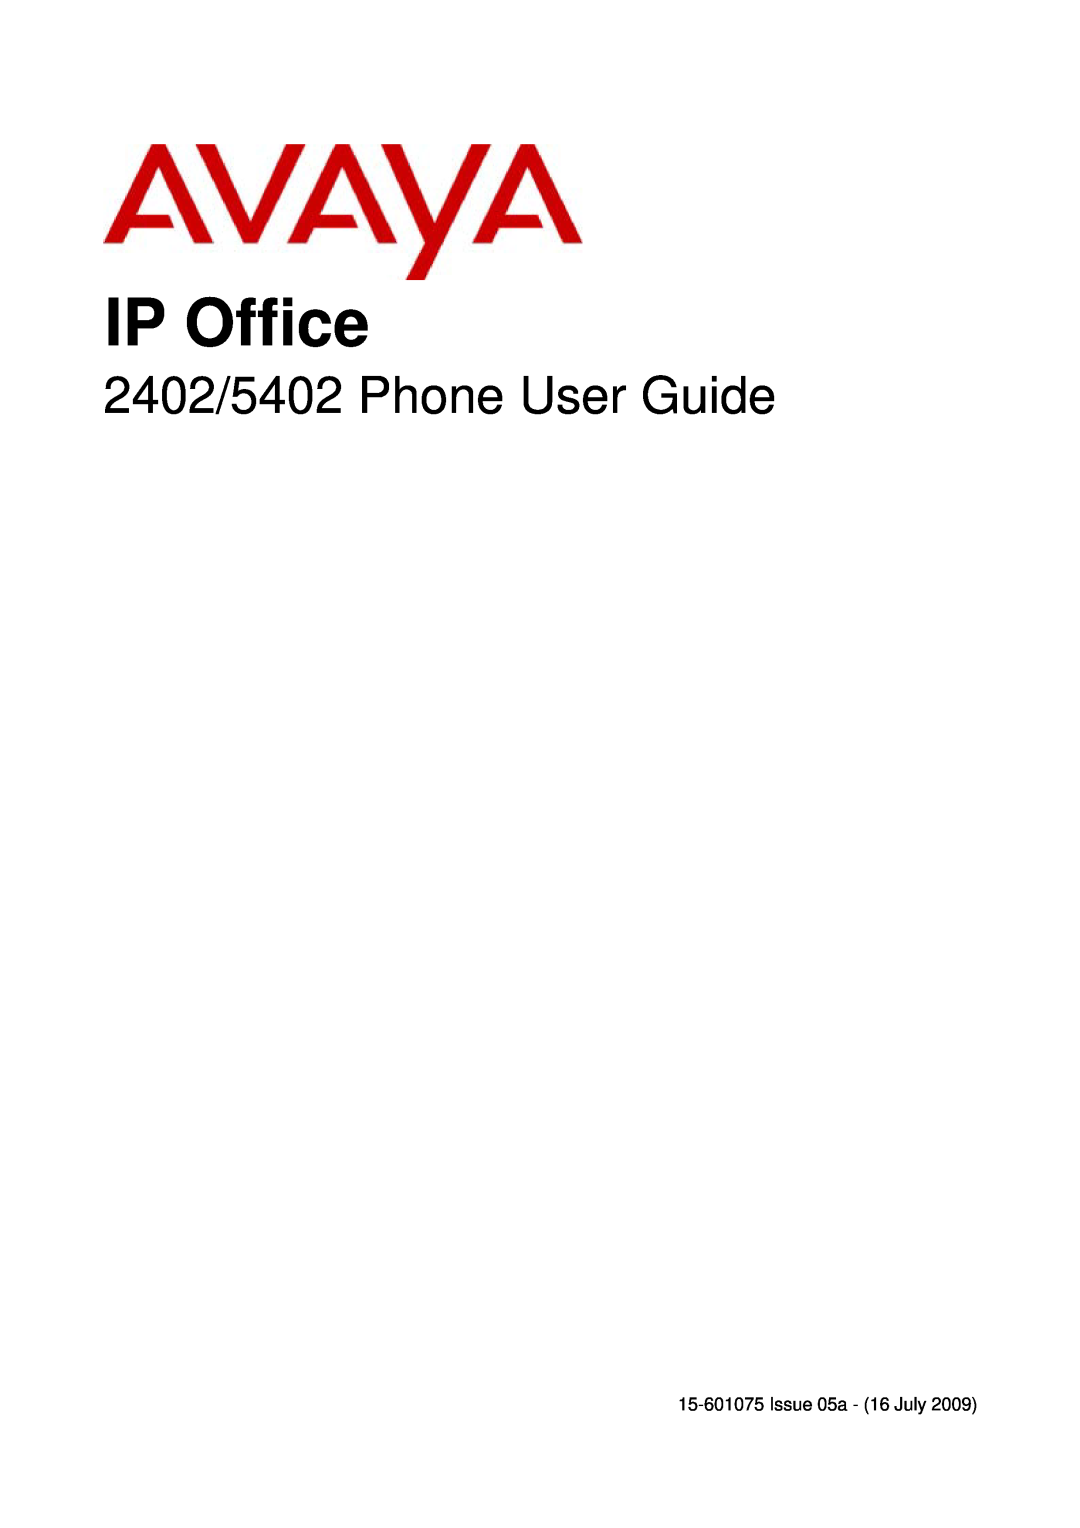 Avaya 15-601075 manual IP Office, 2402/5402 Phone User Guide, Issue 05a - 16 July 